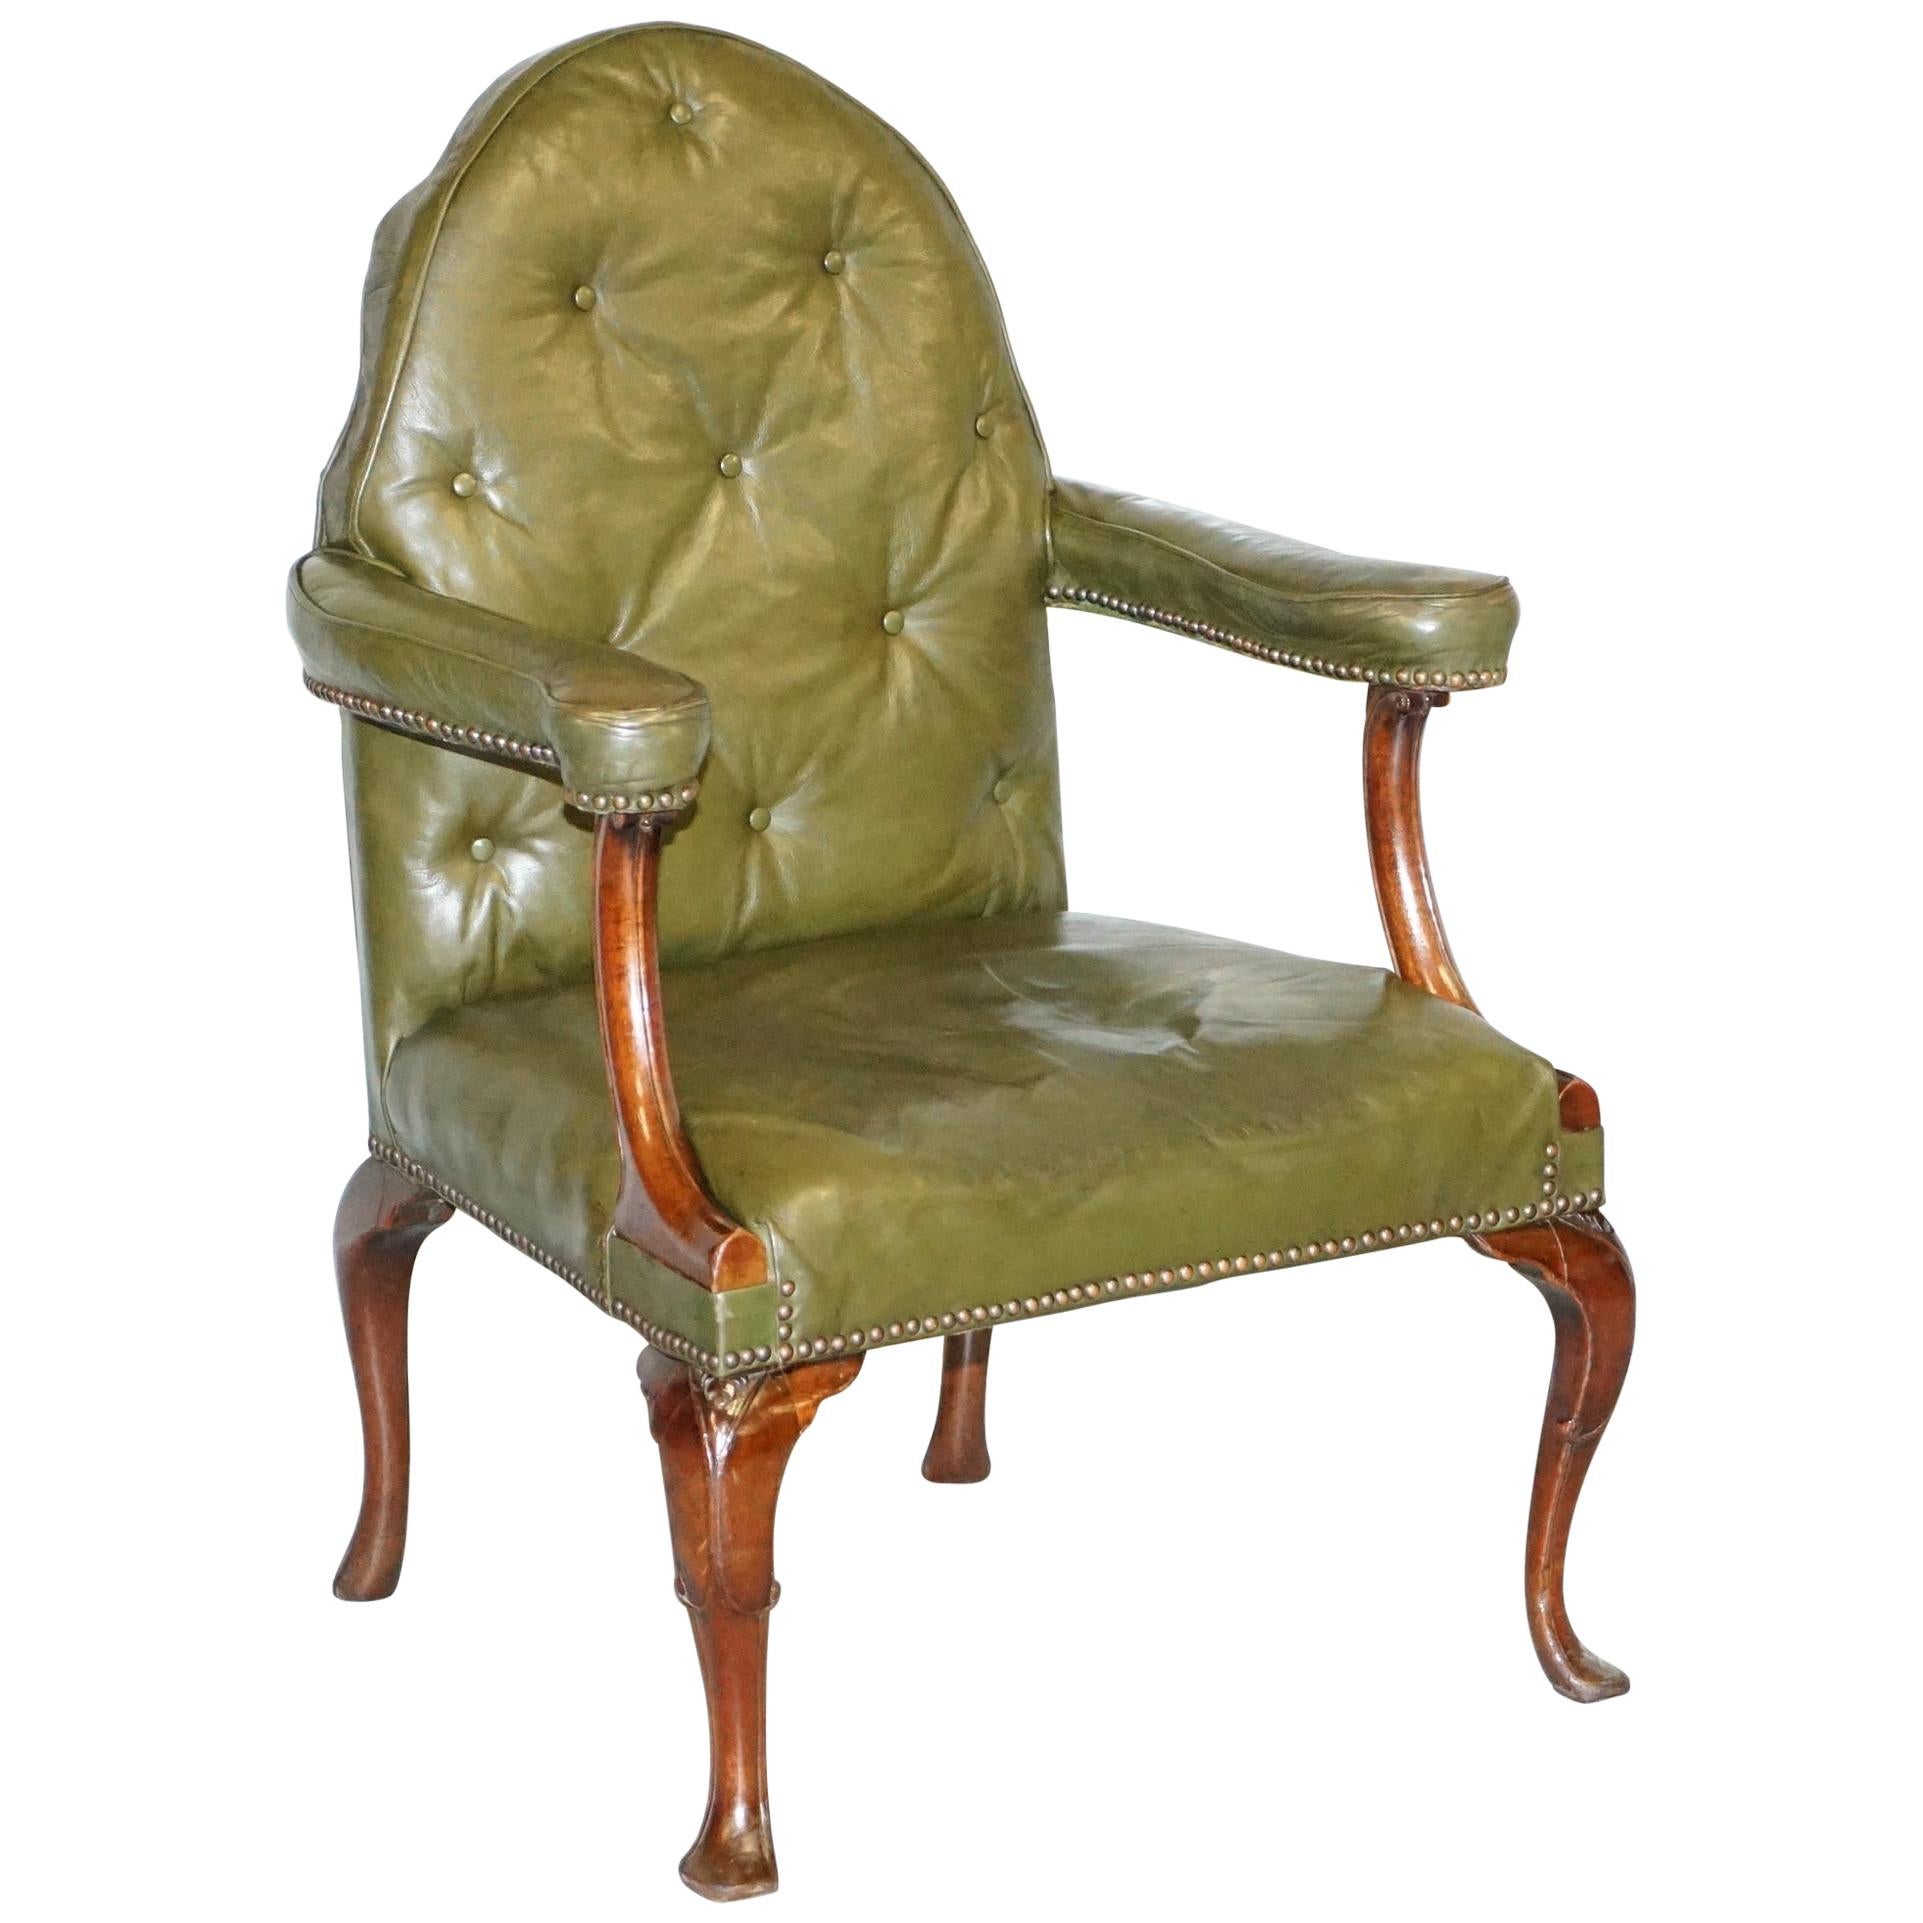 Gothic Revival Georgian Irish Chesterfield Leather Carver Armchair, circa 1800 For Sale